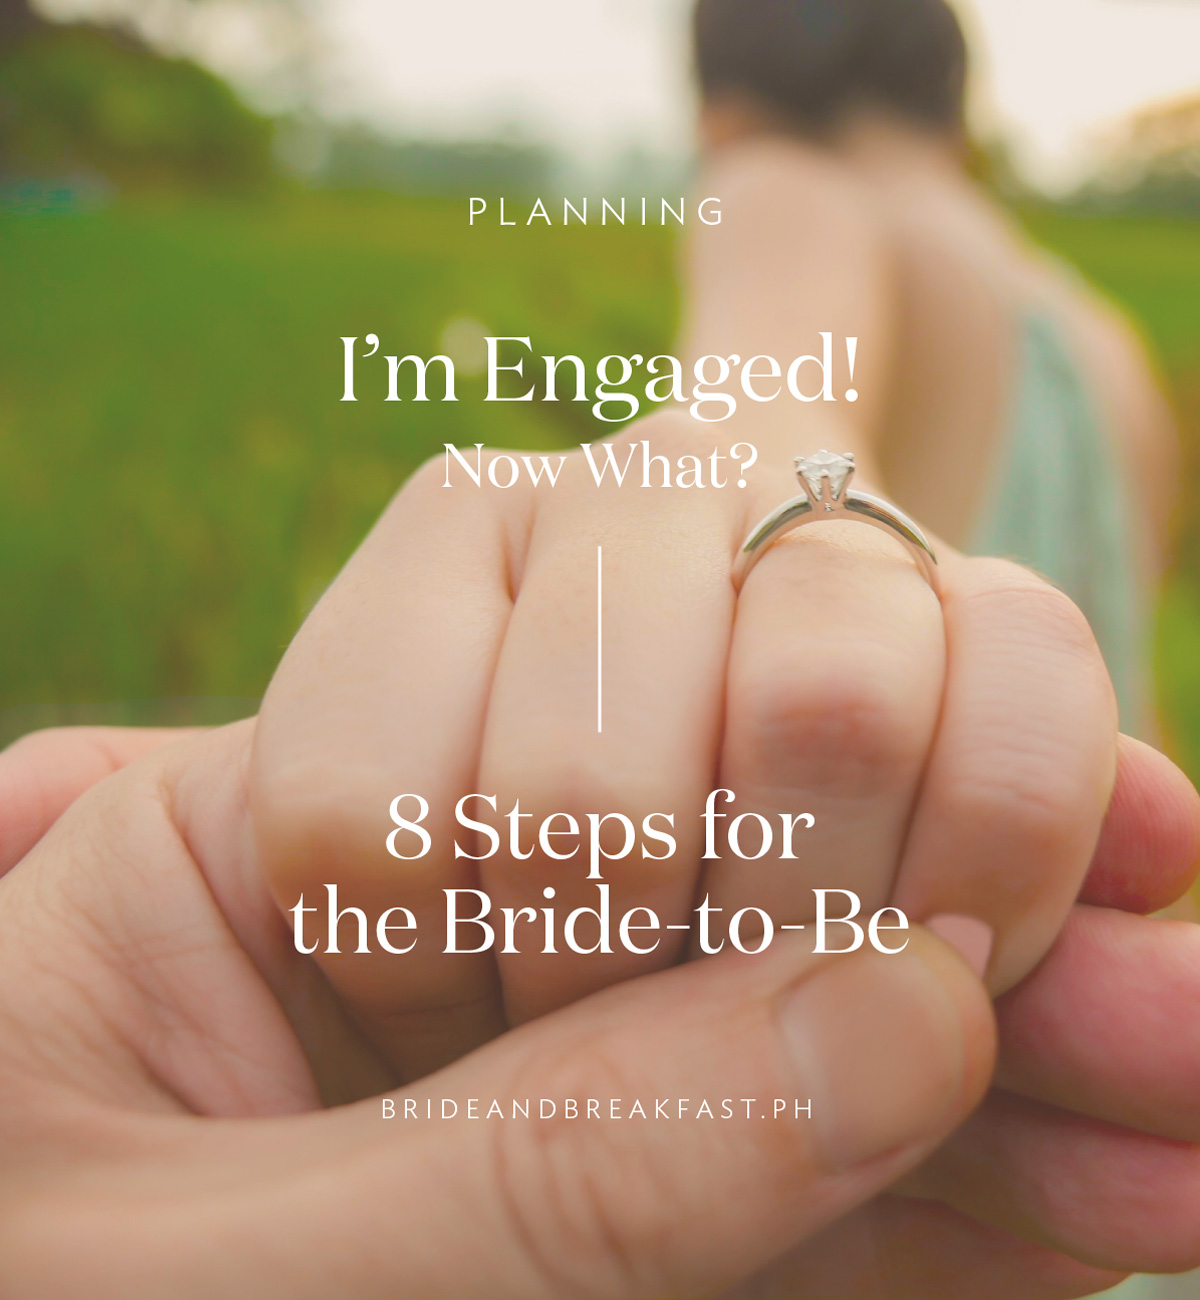 I'm Engaged! Now What? 8 Steps for the Bride-to-Be